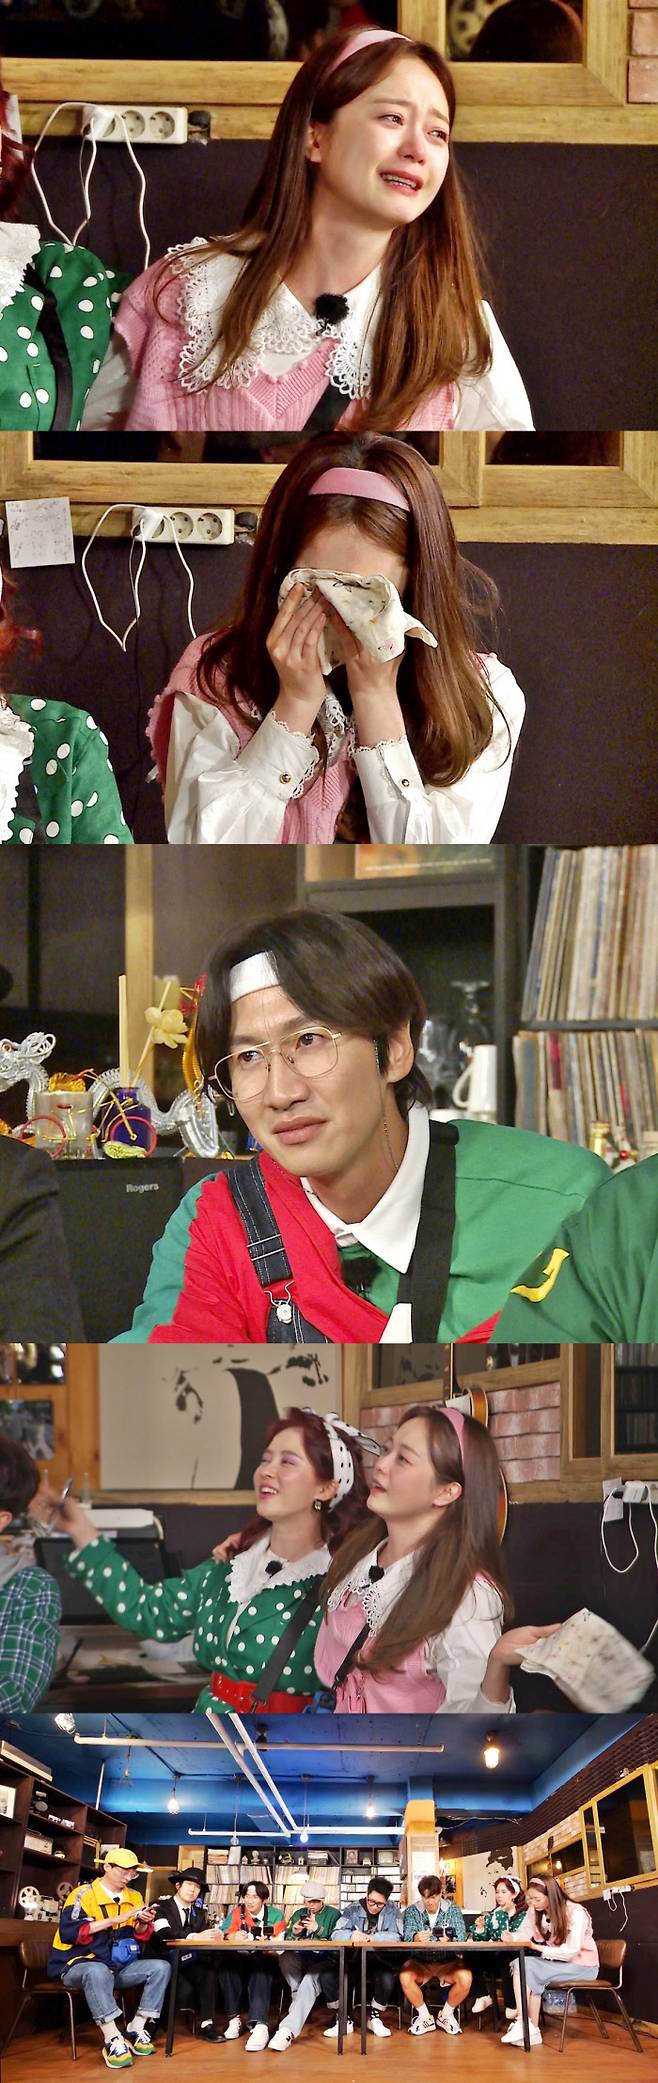 Jeon So-min shed tears as she recalled her past memories.On SBSs Running Man, which will be broadcast on the 2nd (Sun), the story of Jeon So-mins sudden tears during the recording will be revealed.The first episode of 91 Iz Back, which was broadcast last week, gave great fun with eight-color retro fashion and perfect situational drama of the members who became 91 class.In particular, Haha, unlike other members, showed Michael Jackson Omaju fashion alone and became a new laughing point.This week, the members past episodes will be released, and a full-scale recall time will be held.The members conducted a mission at the LP bar where the emotions of the 90s were buried, and submitted the stories and application songs that had been hidden.When Choi Ho-seops Mask of the Year, along with Kim Jong-guks story, When I was in school, I wanted to give up my dream of a singer on the contrary of my parents, came out, all the members were soaked in memories with their hands tightly held.At this time, Jeon So-min, the representative emotional worker of Running Man, said, Its a start again.In particular, I could not speak with the lyrics Do not forget and remember, but before the story was written, Jeon Sang-min recalled the past with a faint recollection of the past, saying, Memories ... I do not write one piece ... and made the members buzz by revealing a meaningful love story with the song Have you ever drank angels and coffee?On the other hand, on this day, the story of Yang Se-chan, who had a big fire in his childhood, Lee Kwang-soo, who wants to be a good mother, and Hahas childhood, which was exceptionally introspective, attracted attention.The reason why the Love Frog Jeon So-min shed tears and the members past history will be revealed at Running Man, which will air at 5 p.m. on Sunday the 2nd.